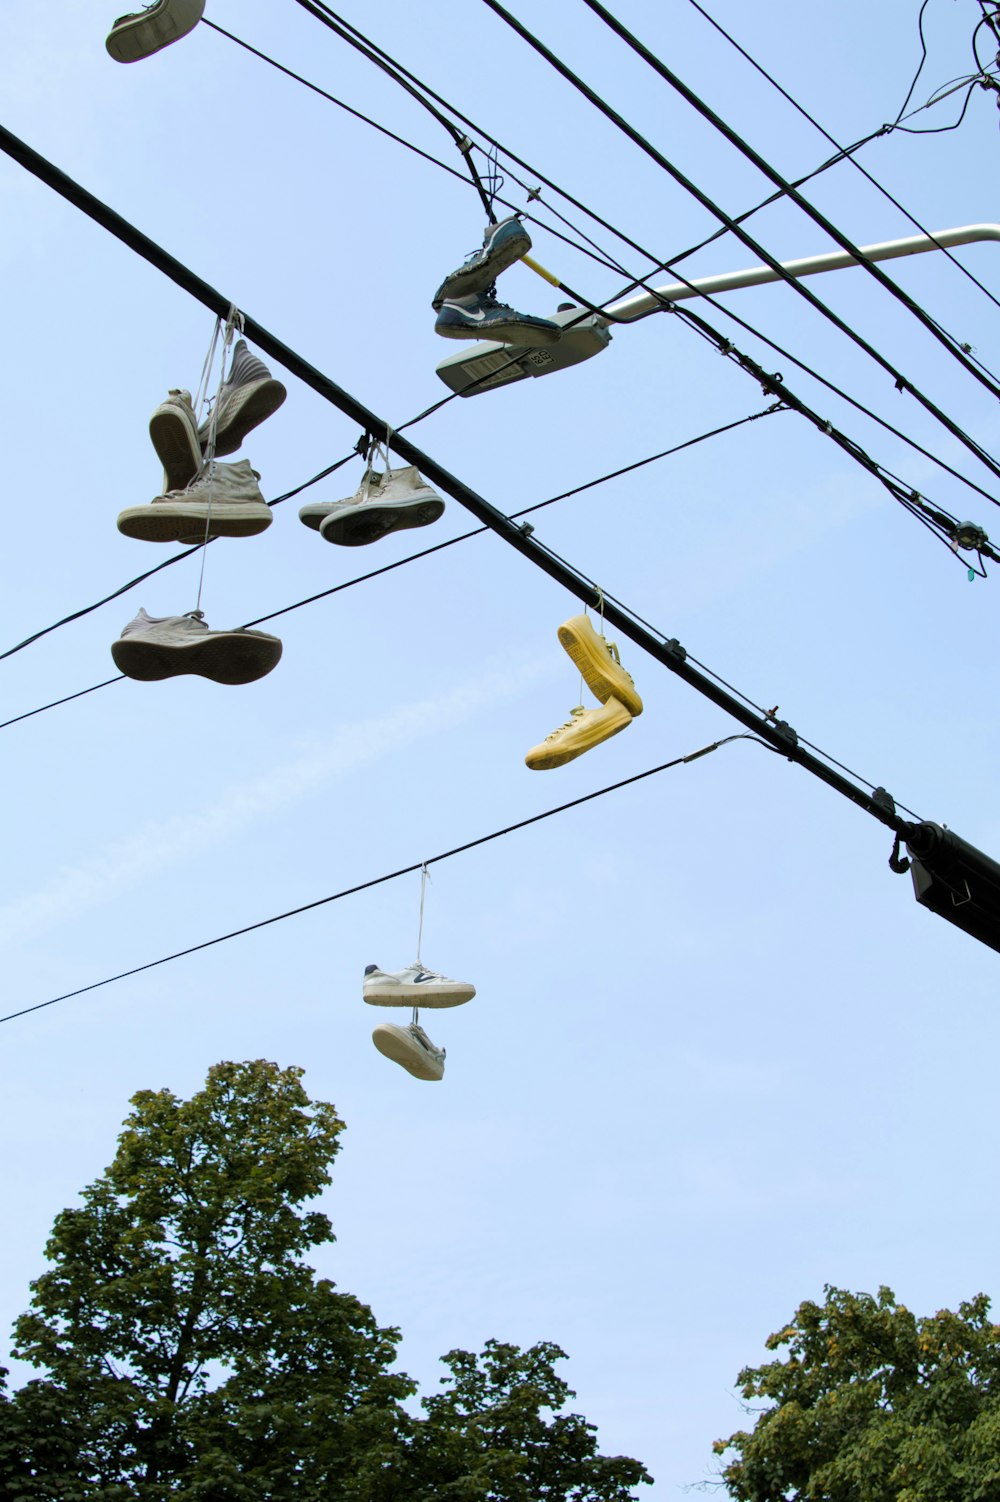 a pair of shoes hanging from a power line